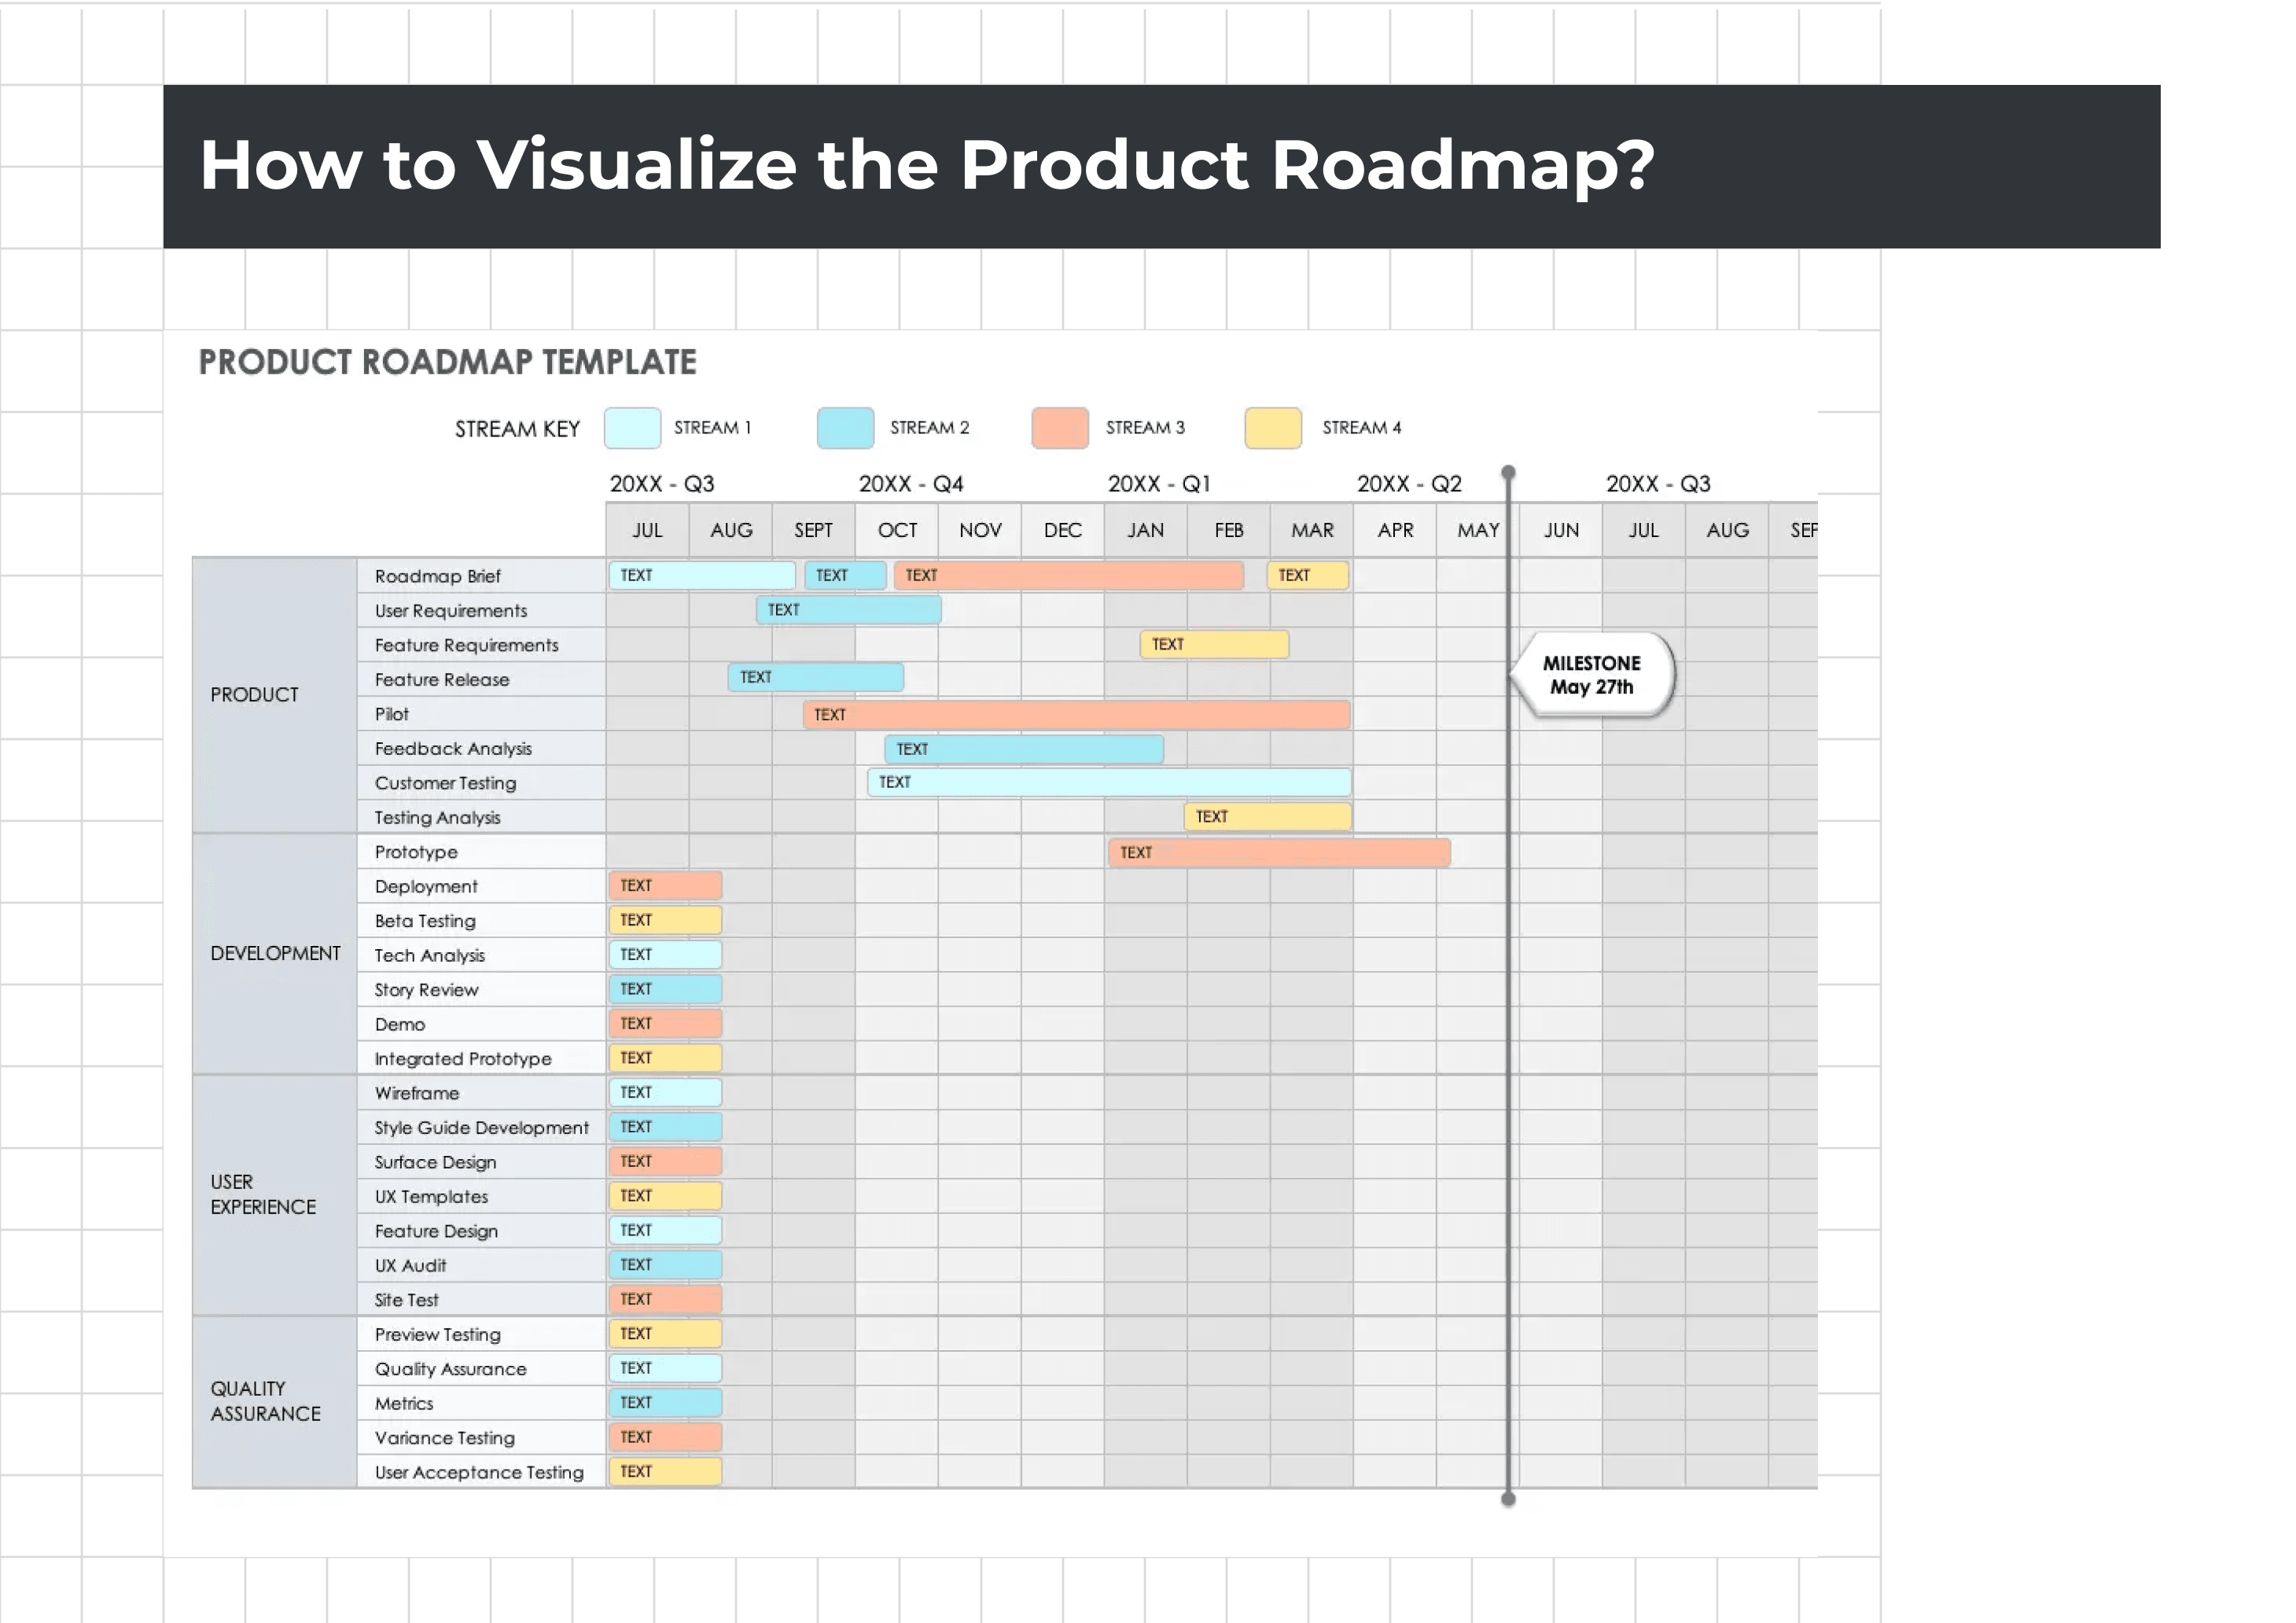 How to Visualize the Product Roadmap - Spreadsheet